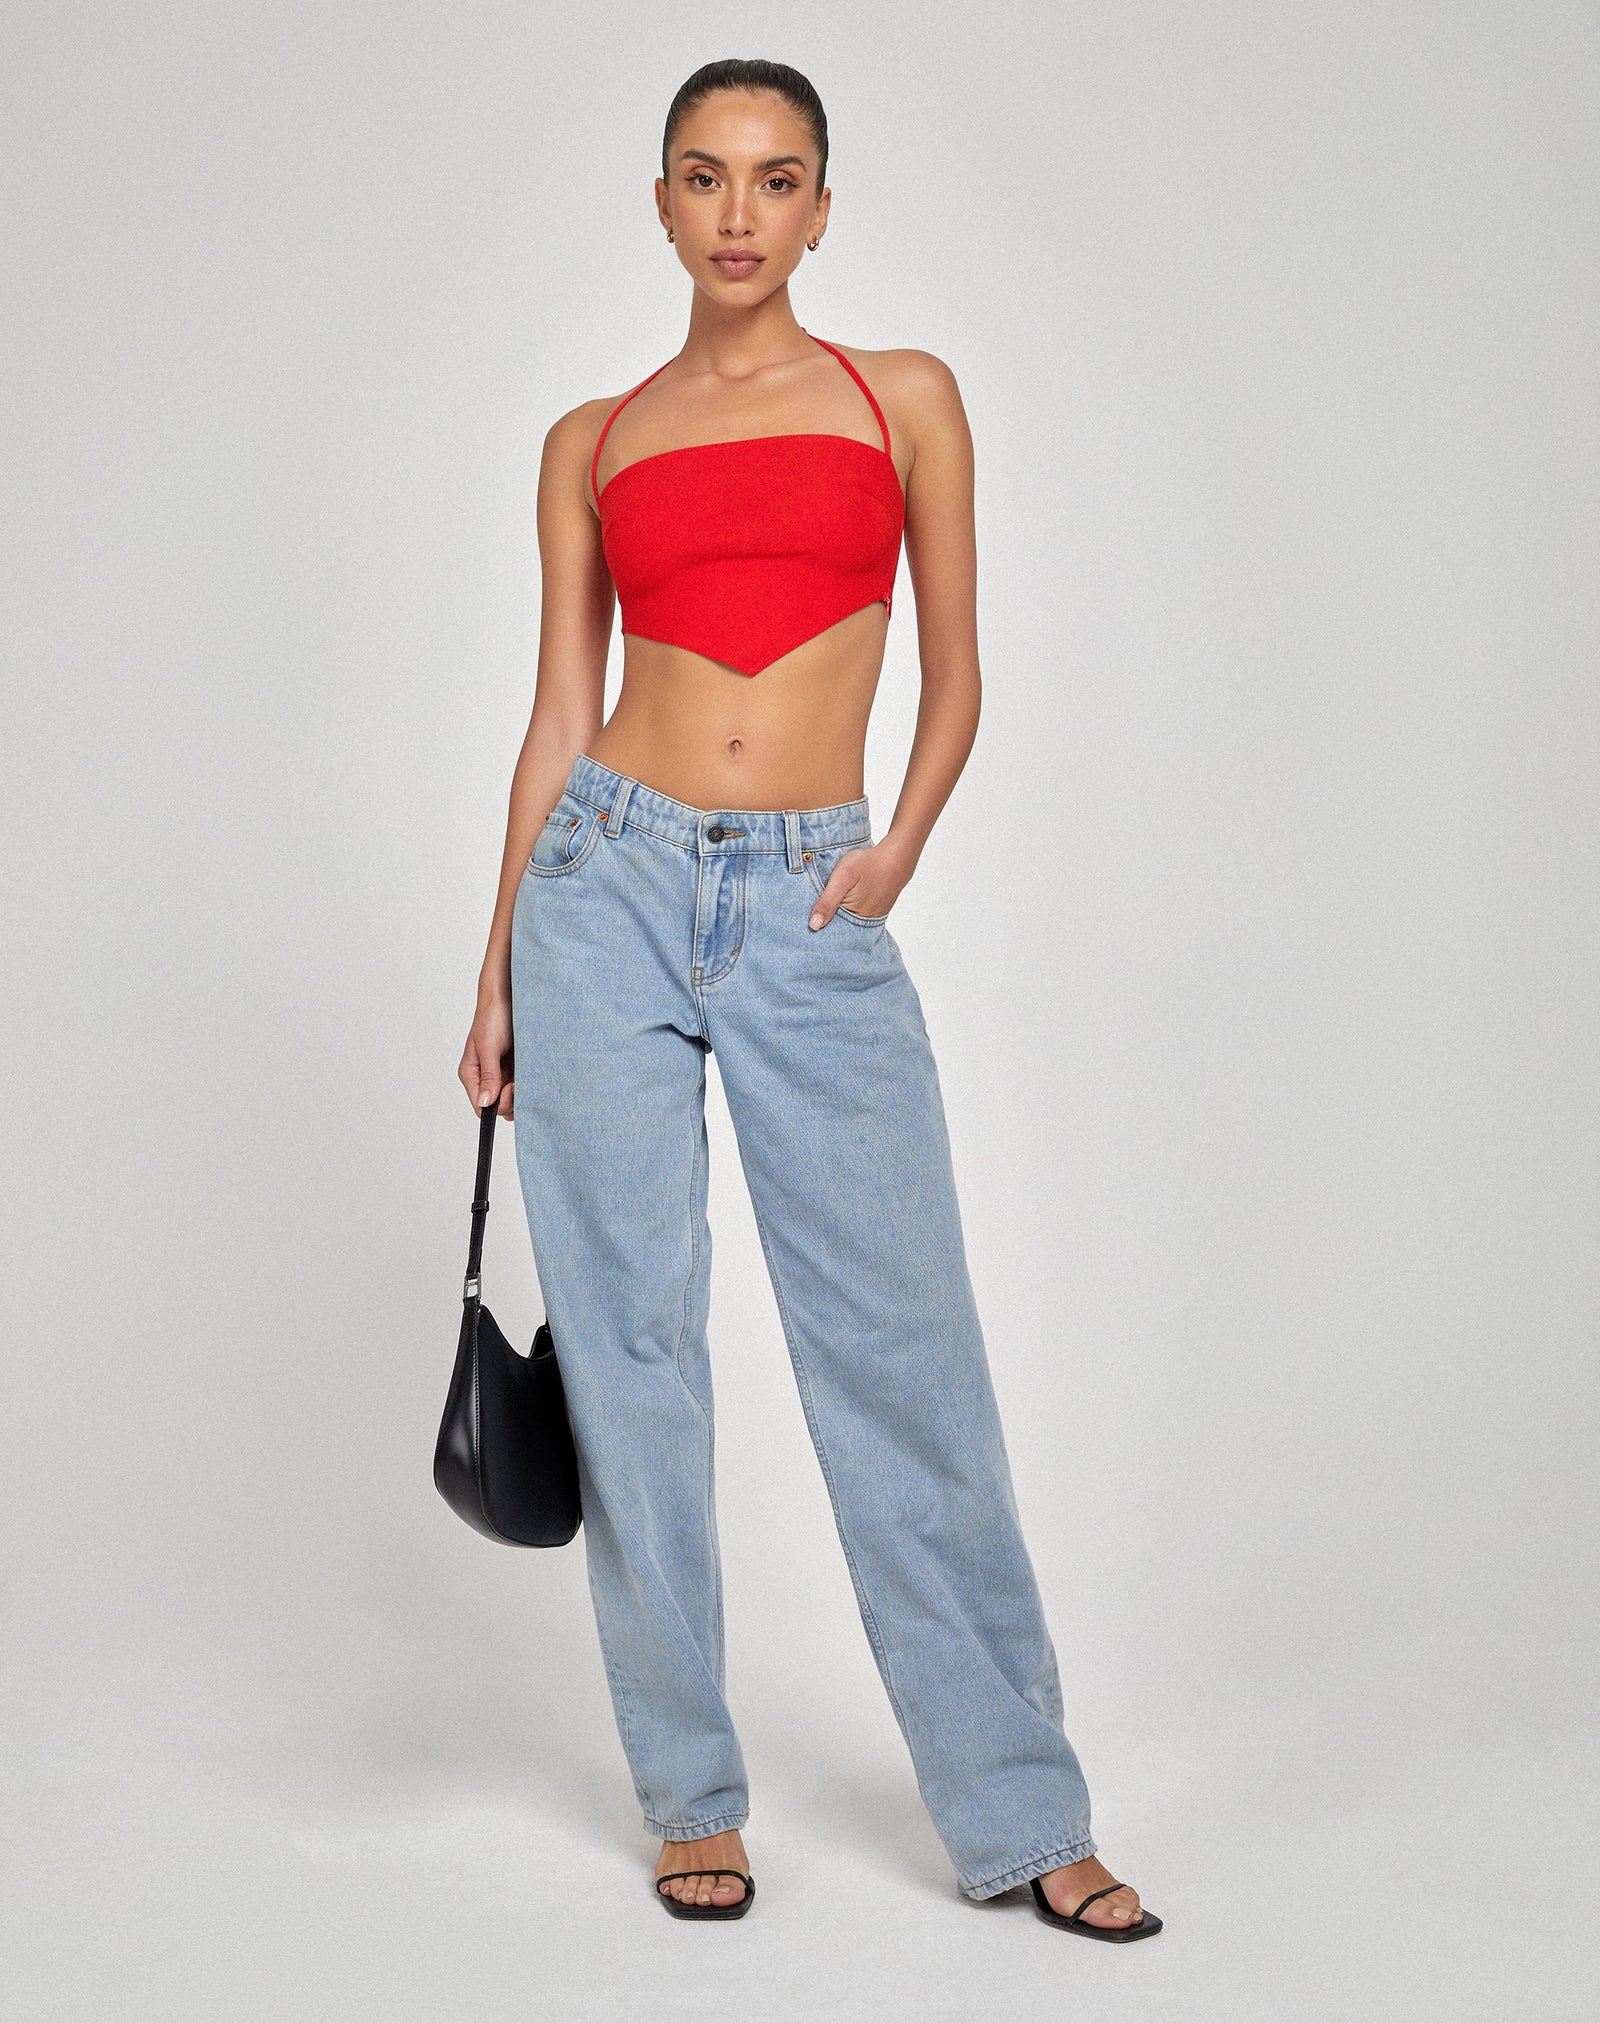 Classy Red Crop Top And Jeans Outfit